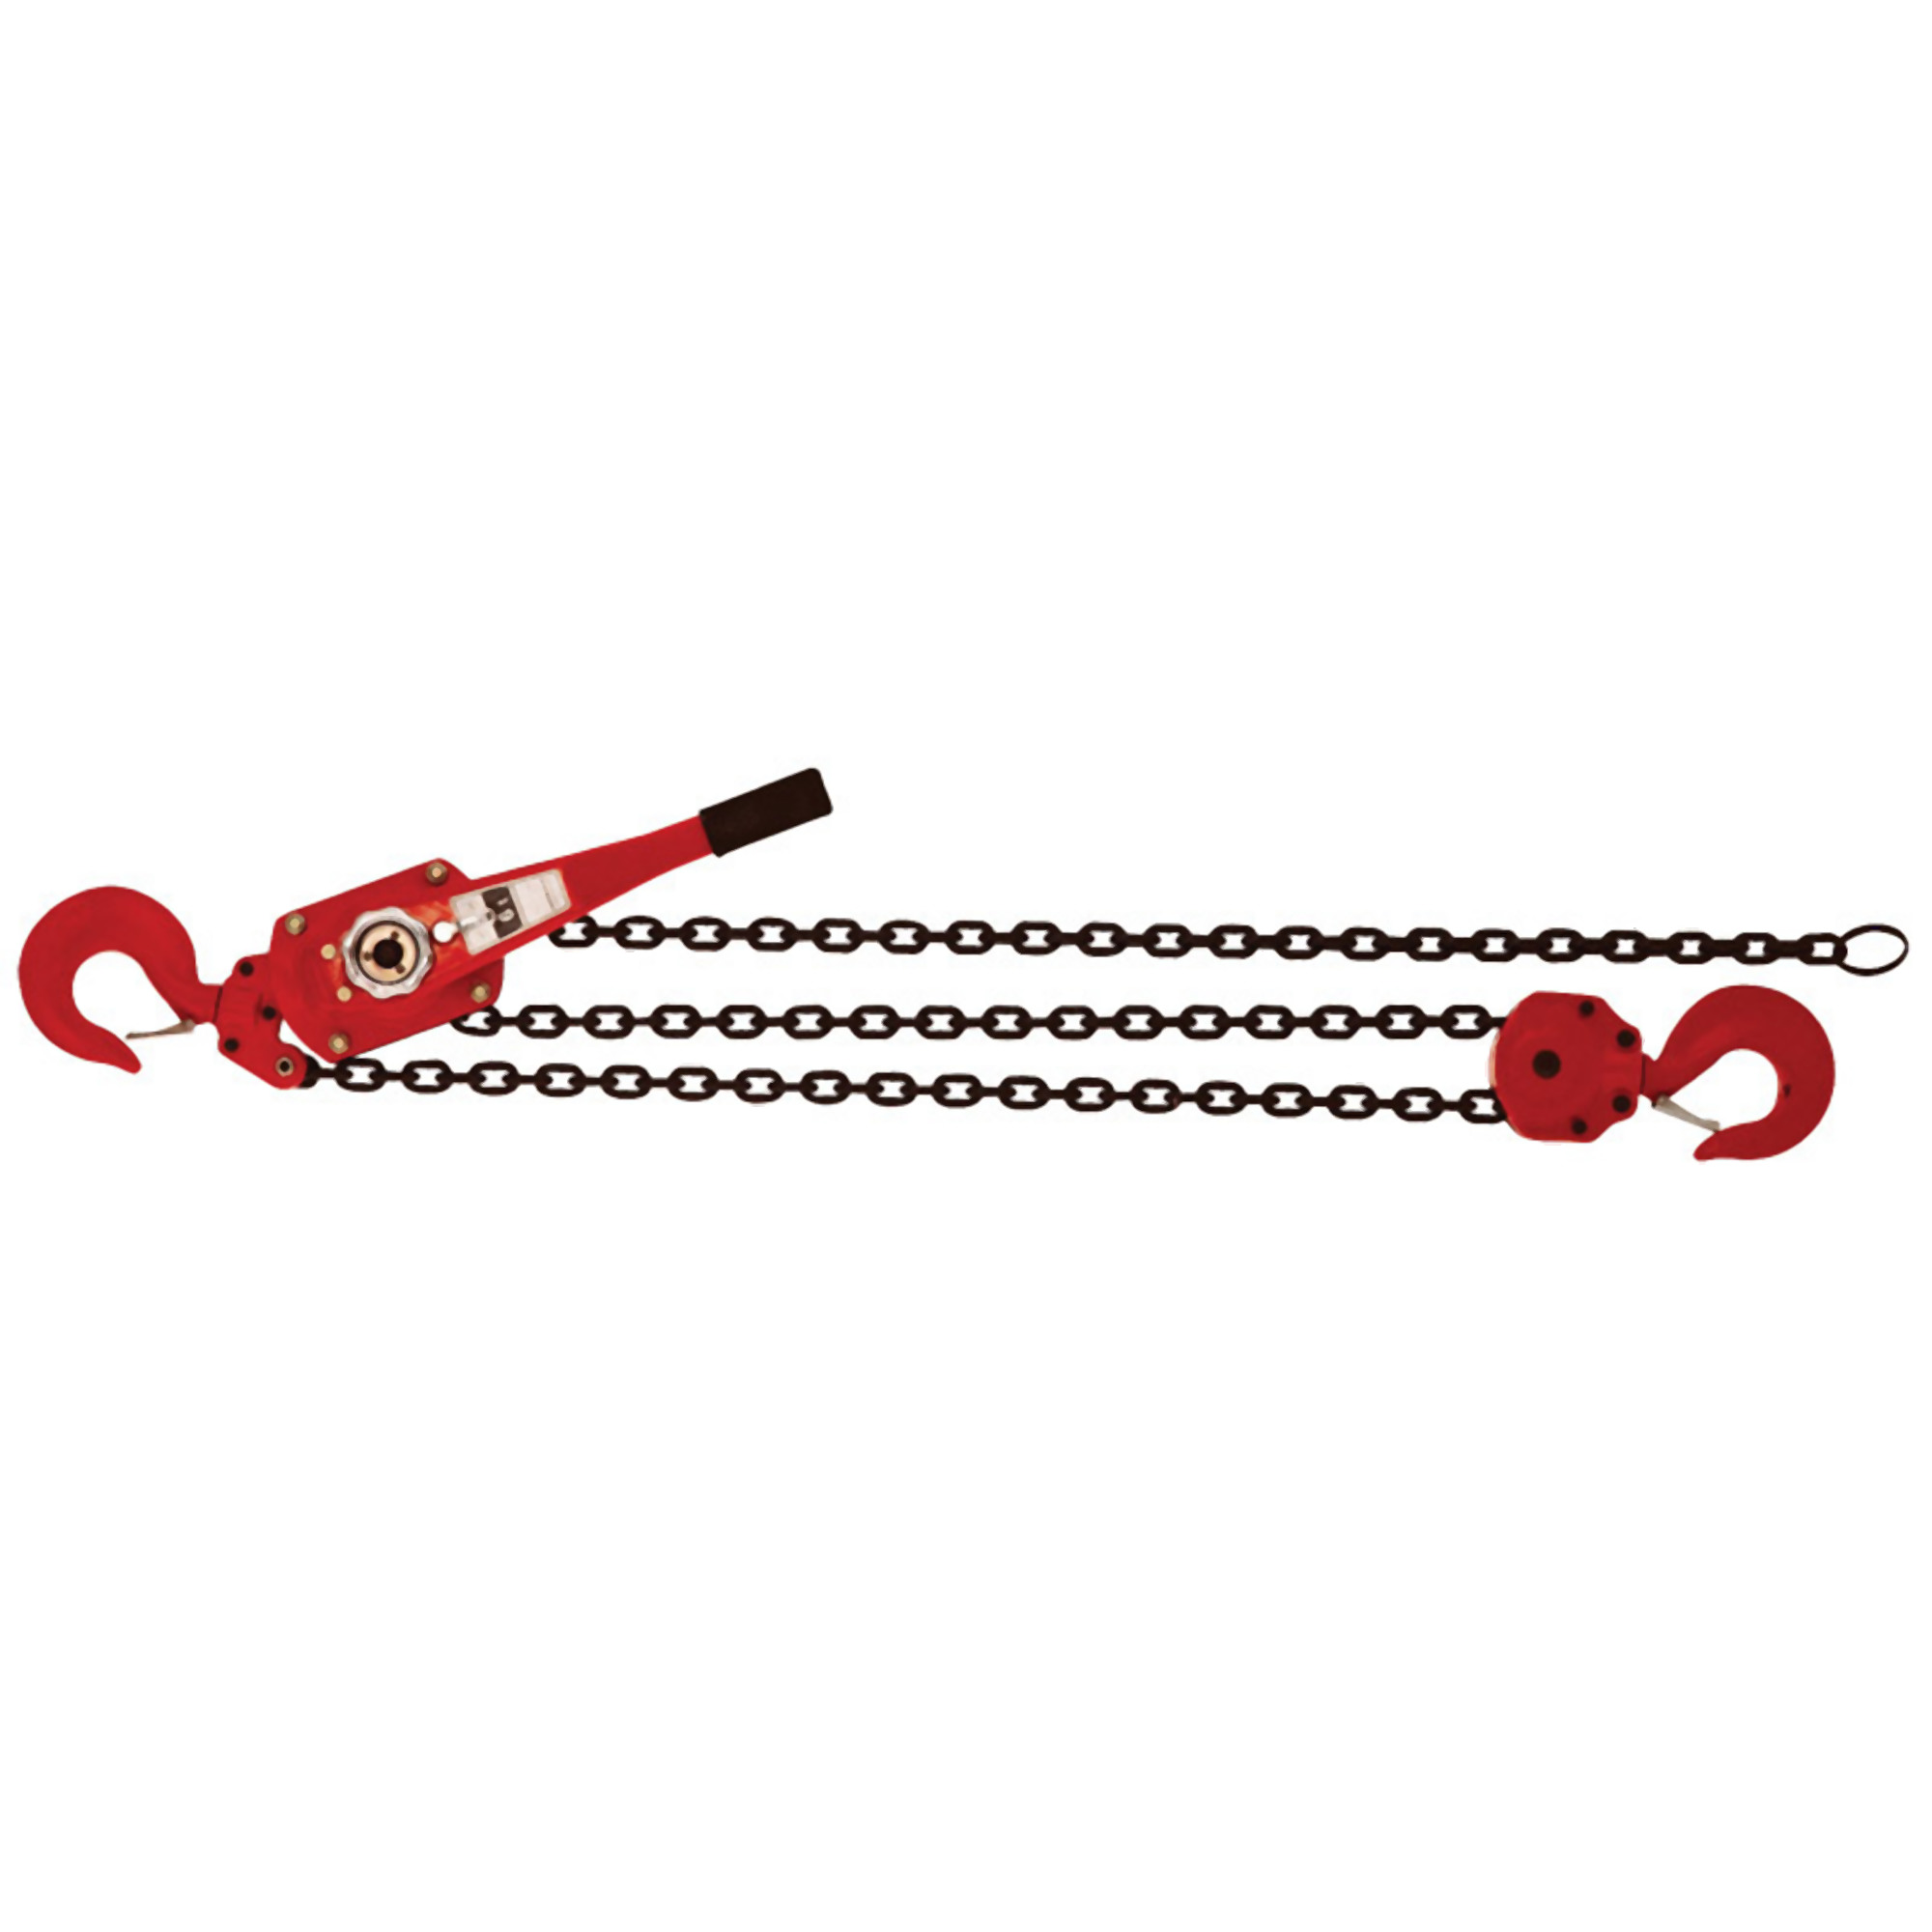 American Power Pull, 6 ton chain puller w/ 20ft. lift, Power Source Manual Lever, Capacity 12000 lb, Lift Height 20 ft, Model 660-20